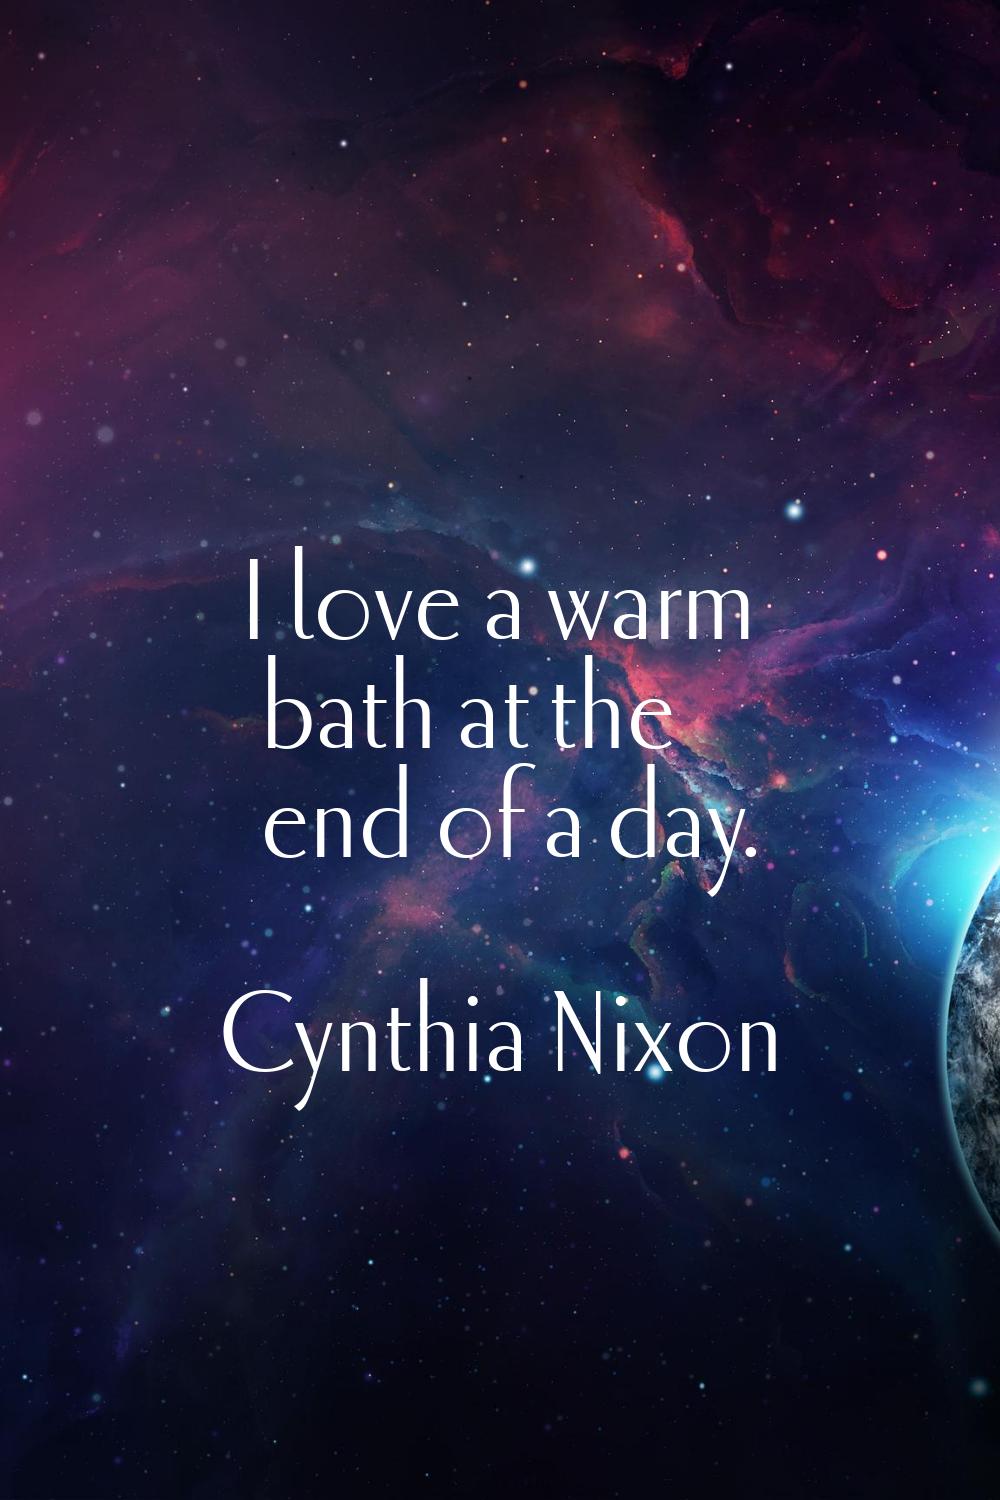 I love a warm bath at the end of a day.